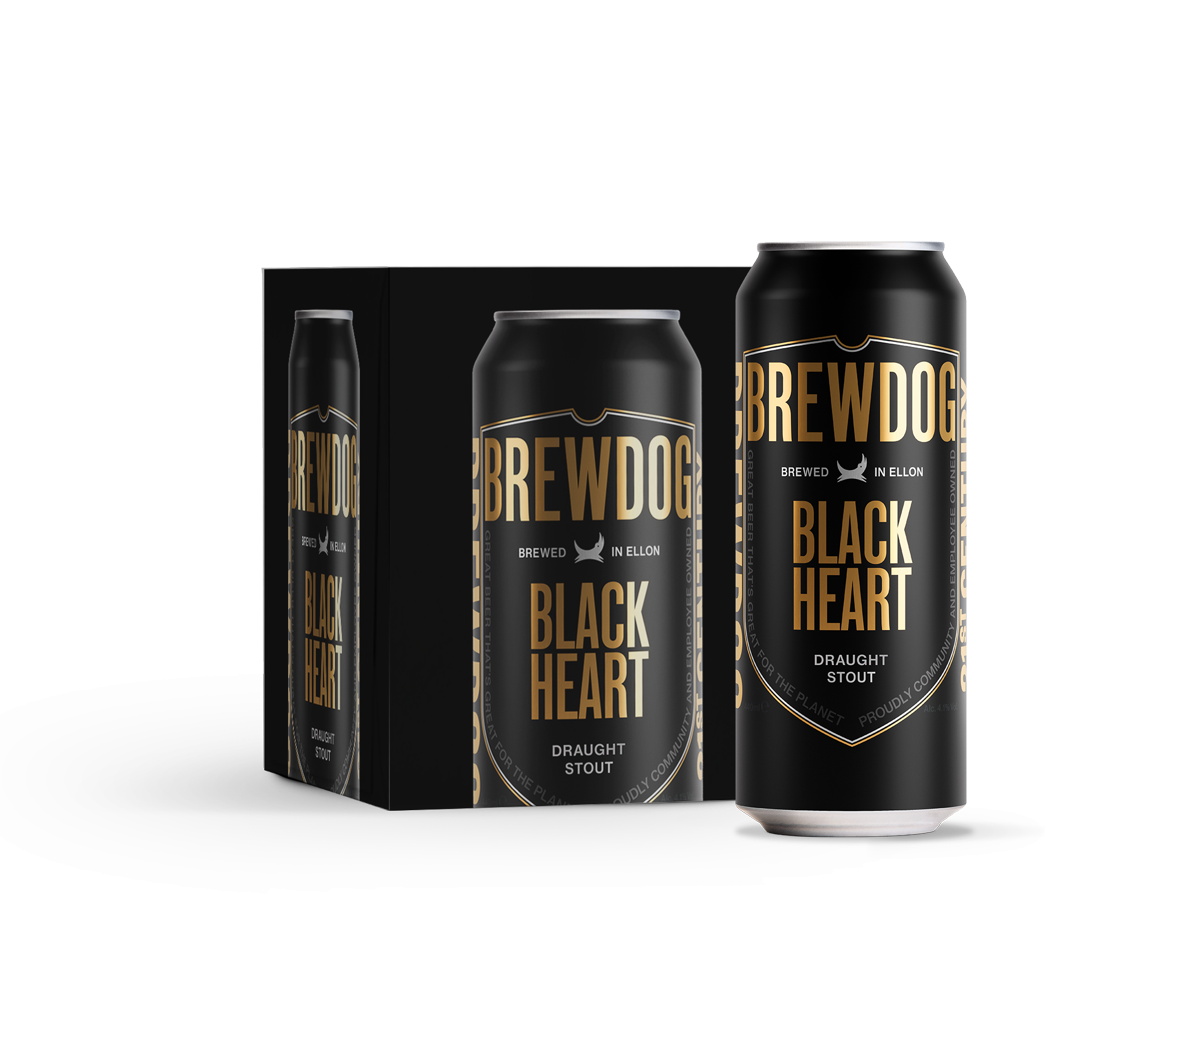 BrewDog Black Heart stout launched into convenience channel